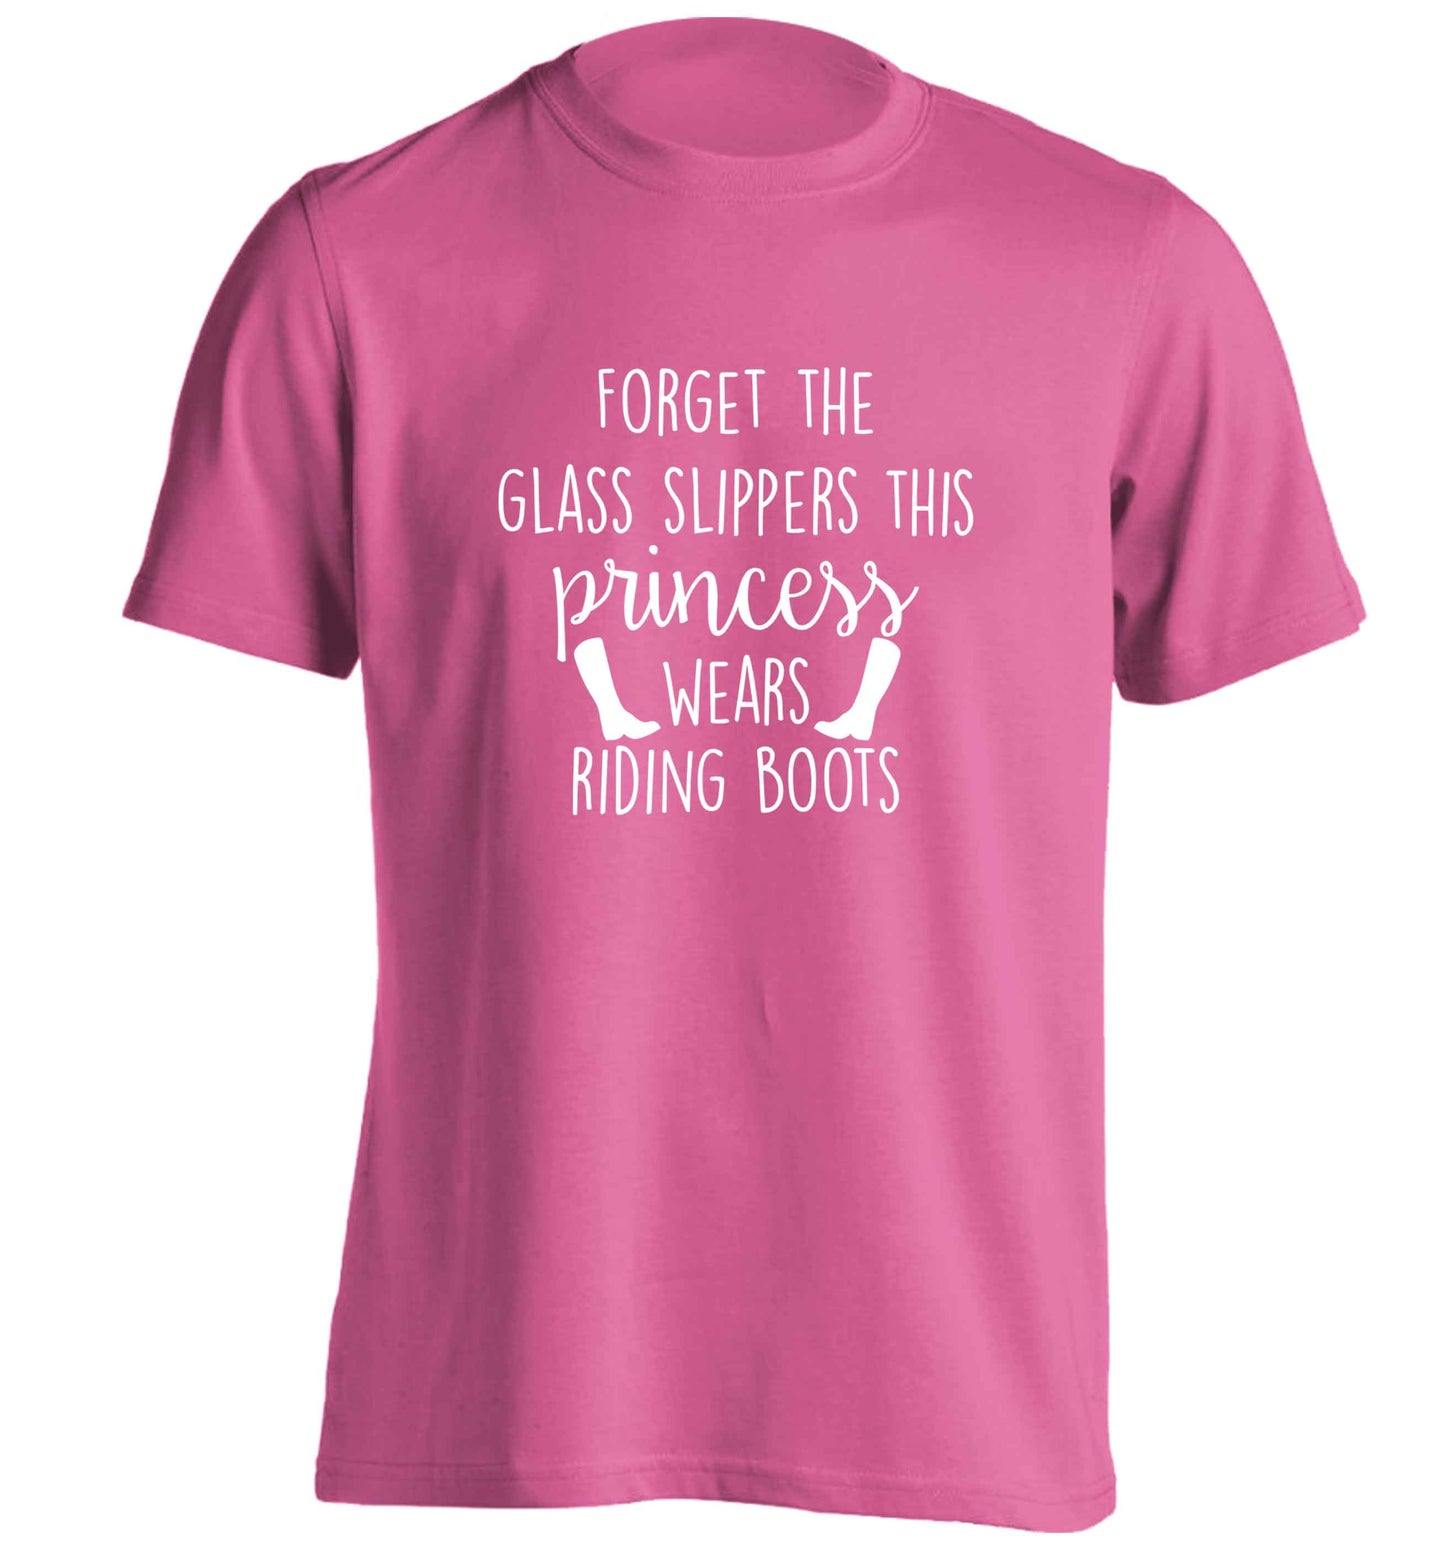 Forget the glass slippers this princess wears riding boots adults unisex pink Tshirt 2XL